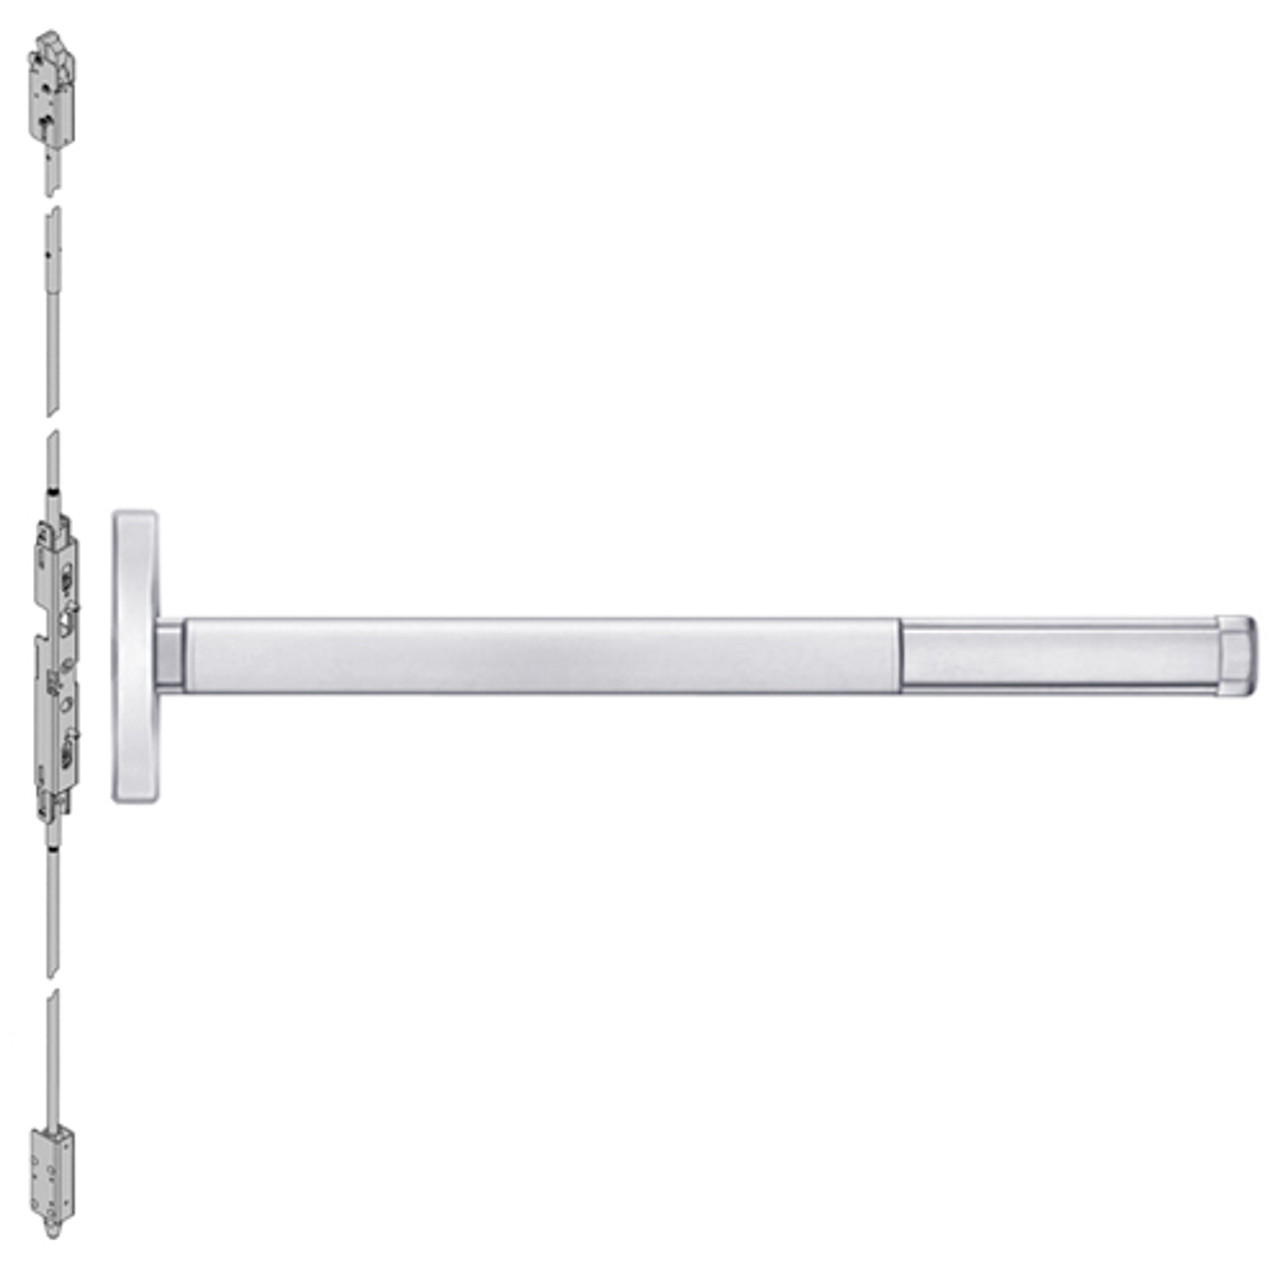 DE2608LBR-625-36 PHI 2600 Series Concealed Vertical Rod Exit Device with Delayed Egress Prepped for Key Controls Lever in Bright Chrome Finish